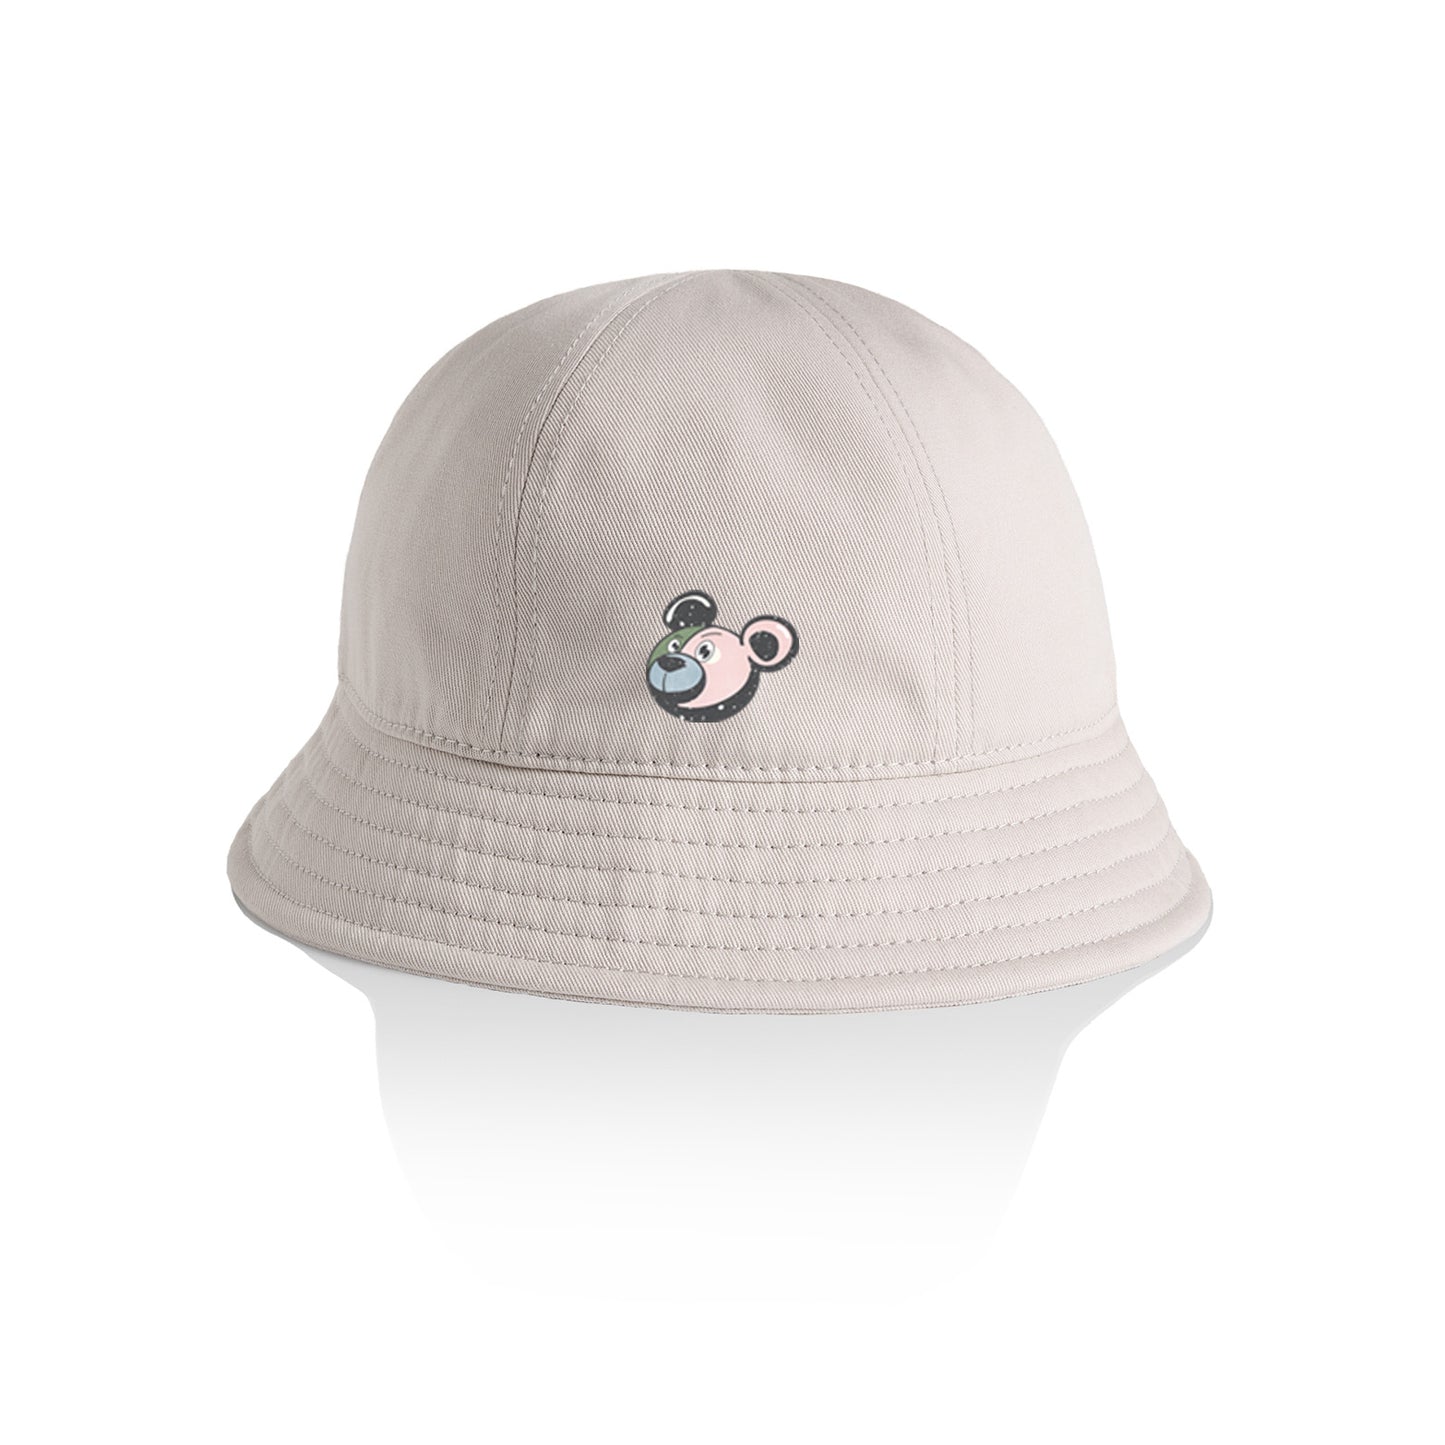 My Edible Wore Off Embroidered Women's Bucket Hat